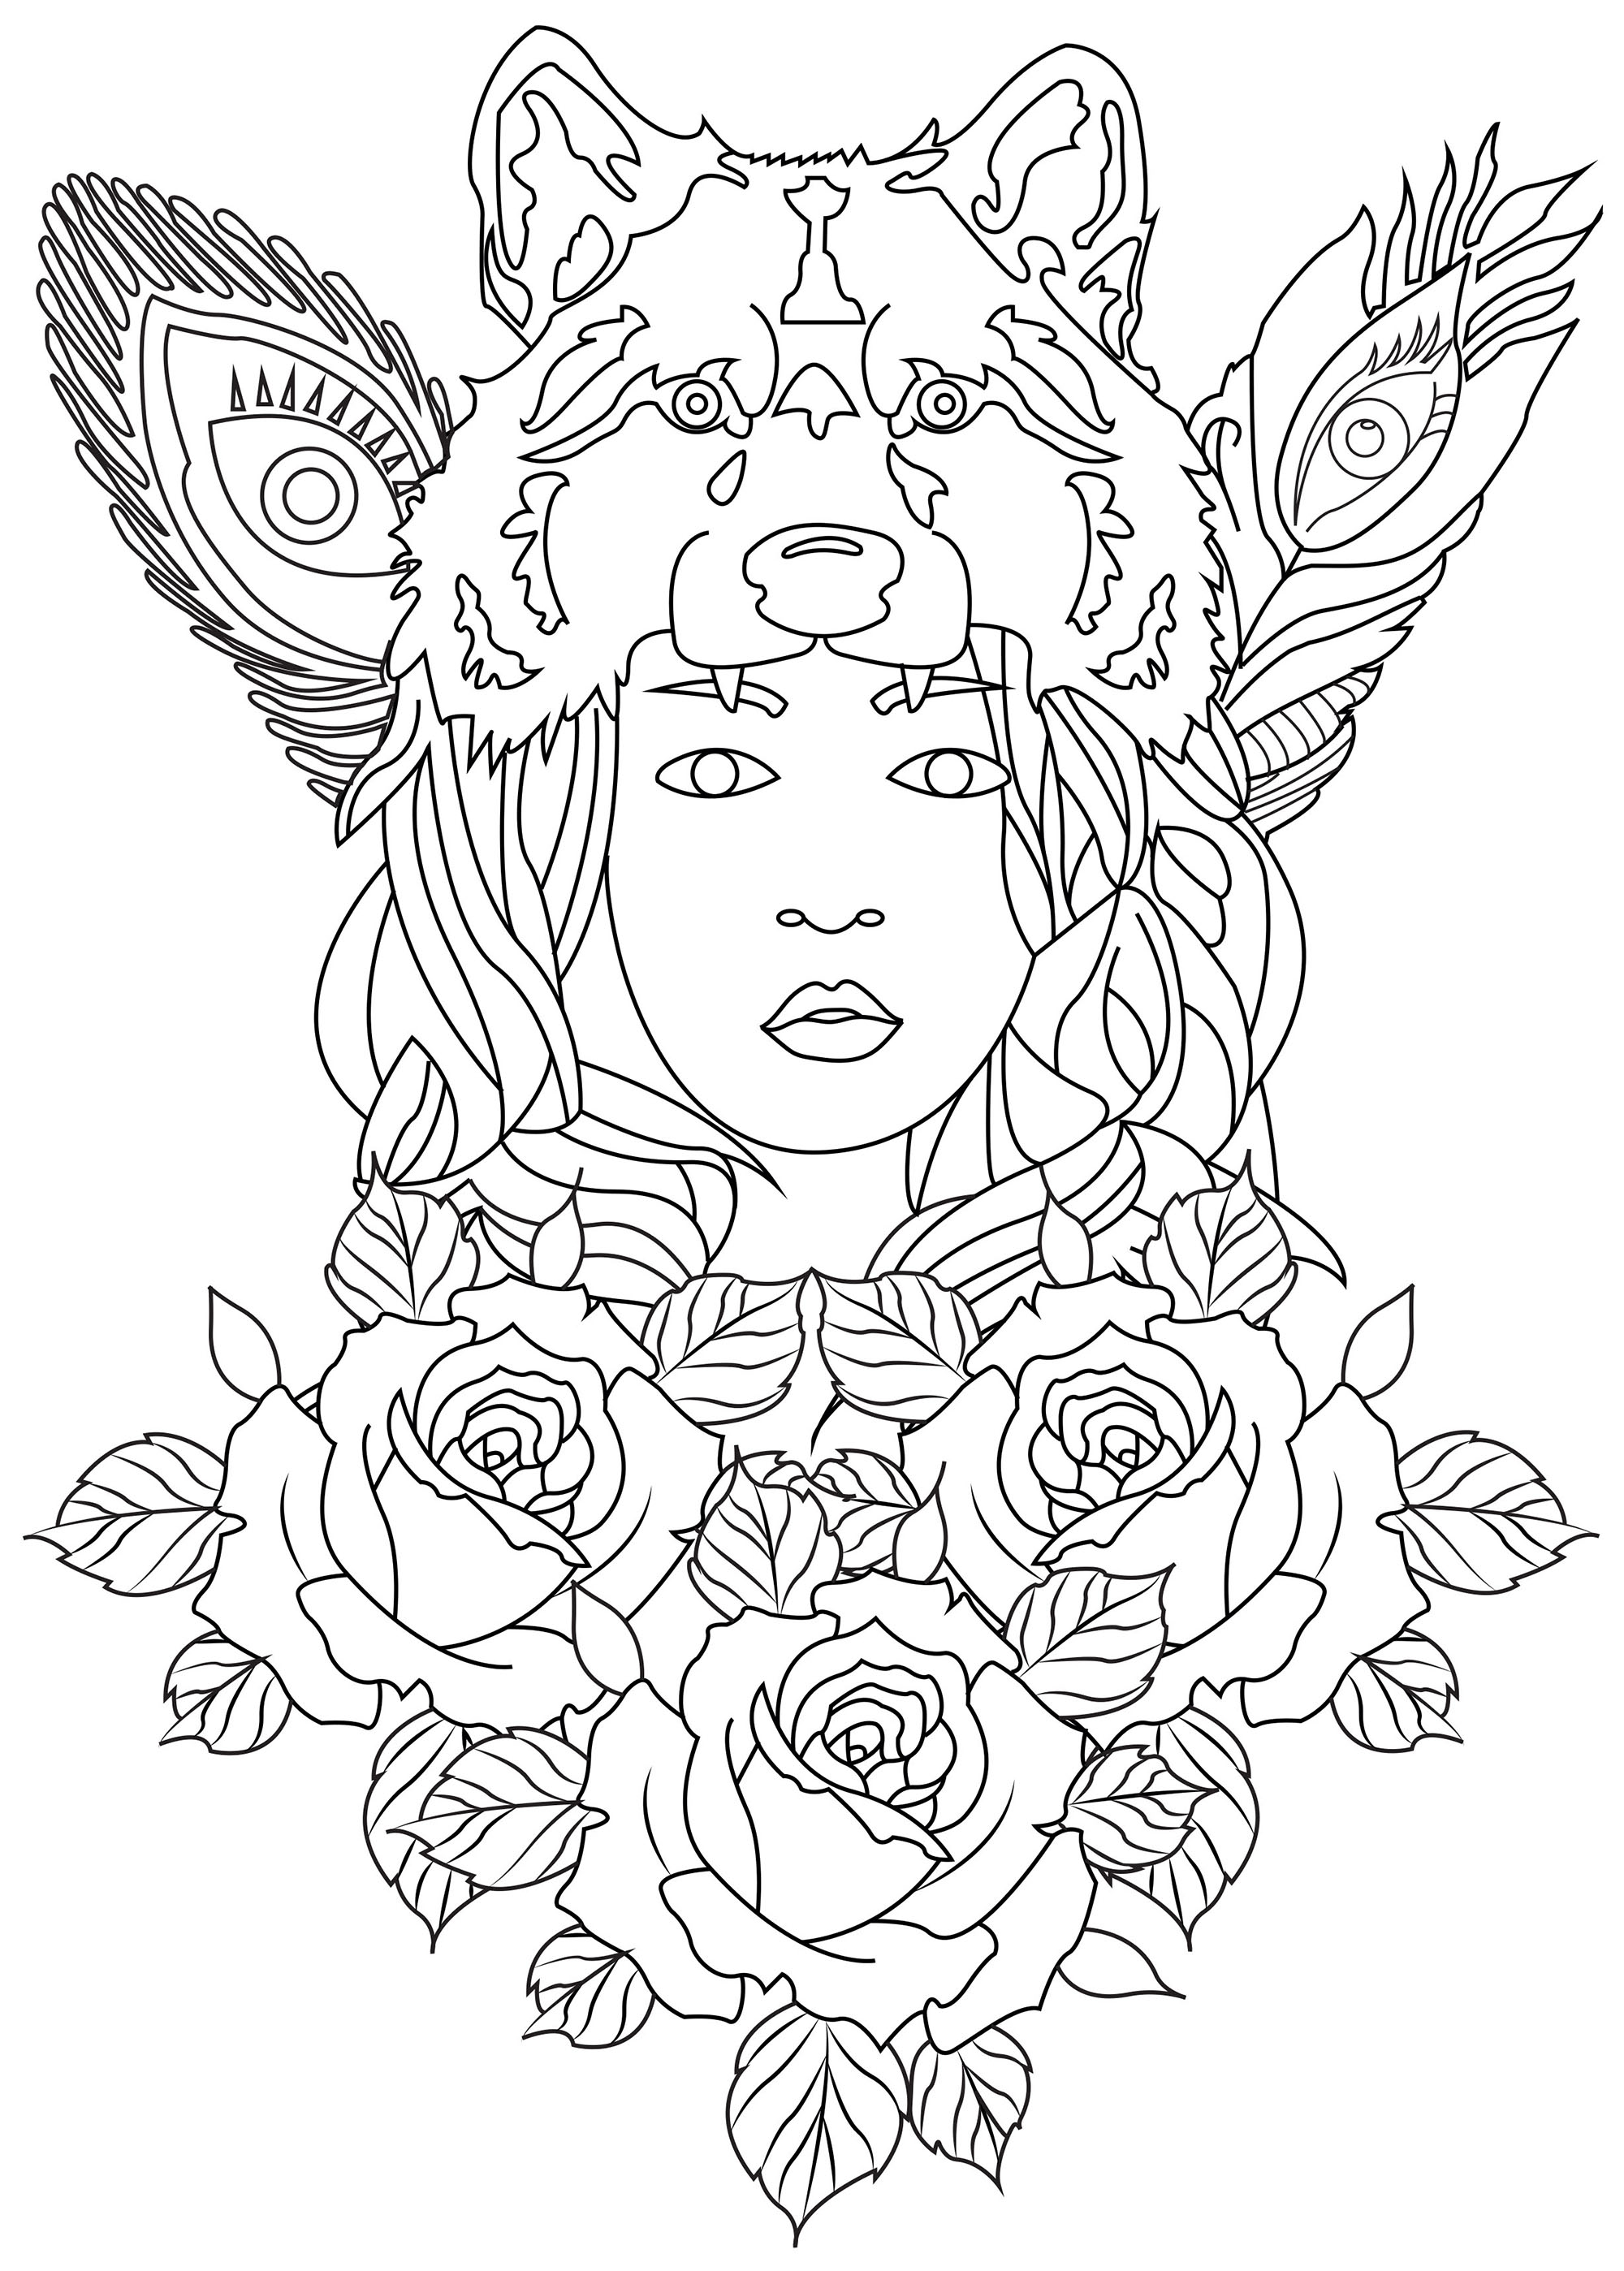 Rose - Coloring Pages for Adults